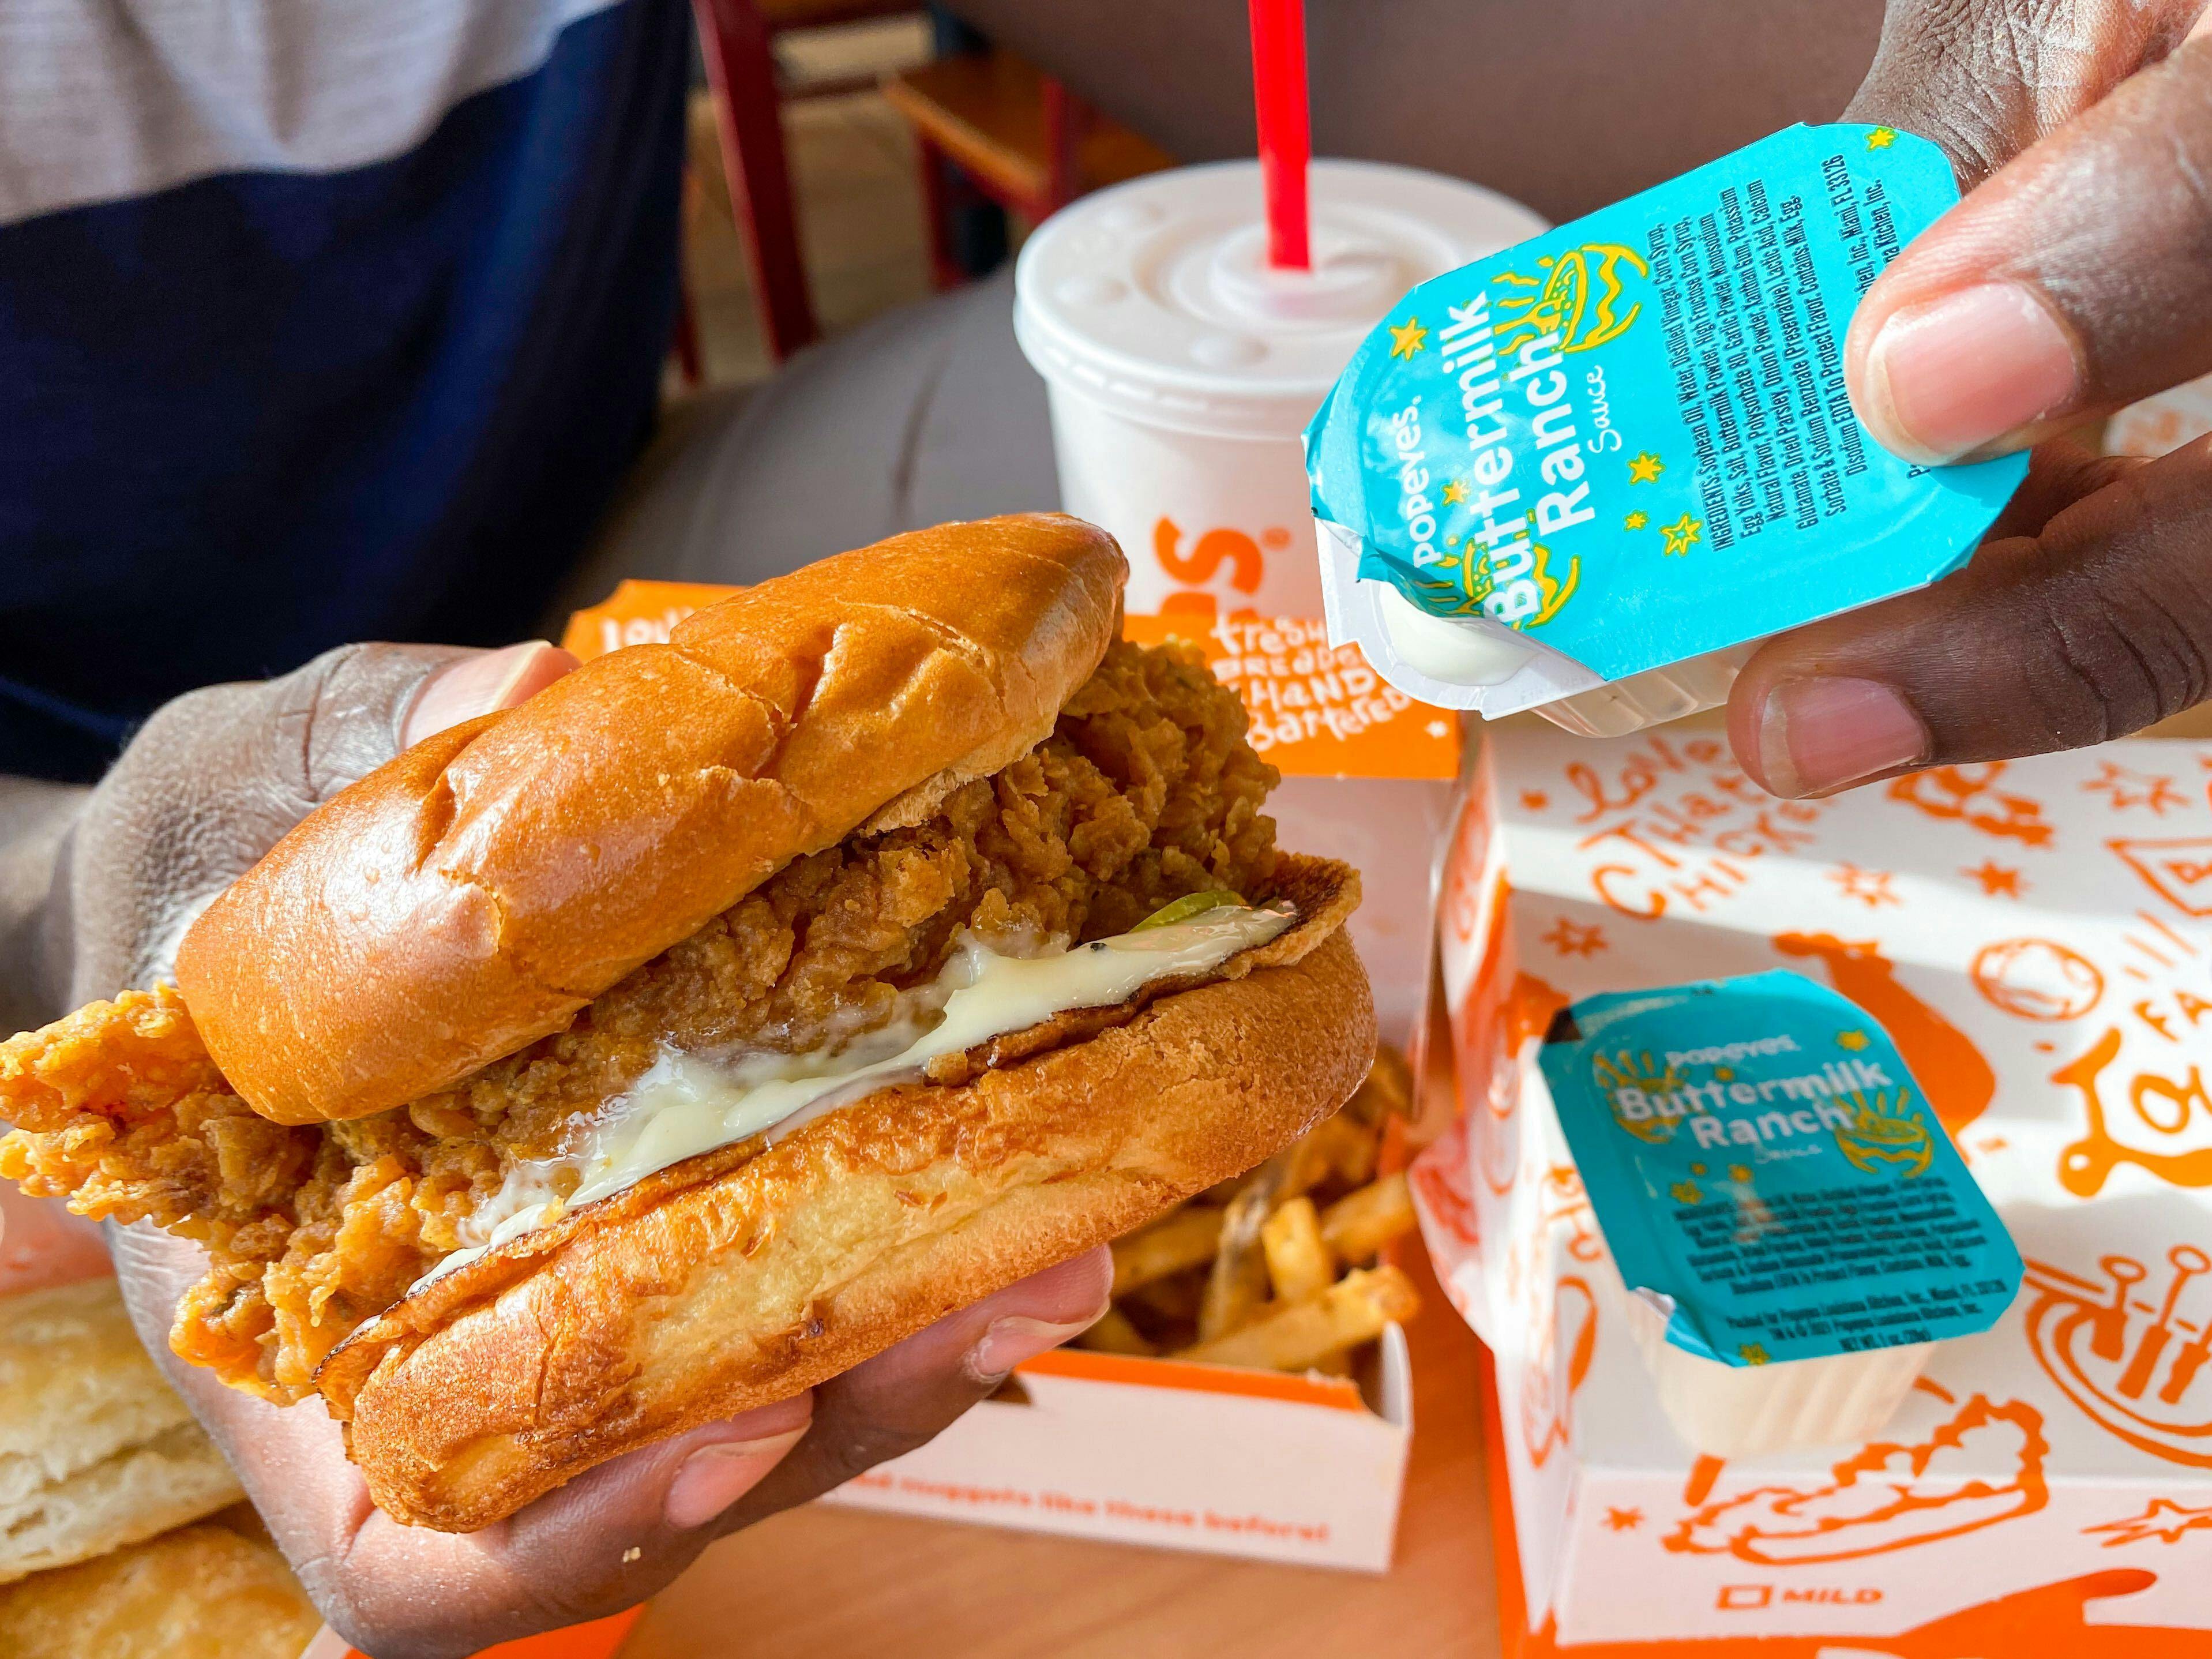 A person's hands holding a Popeyes chicken sandwich and a container of Buttermilk Ranch at a table in Popeyes.